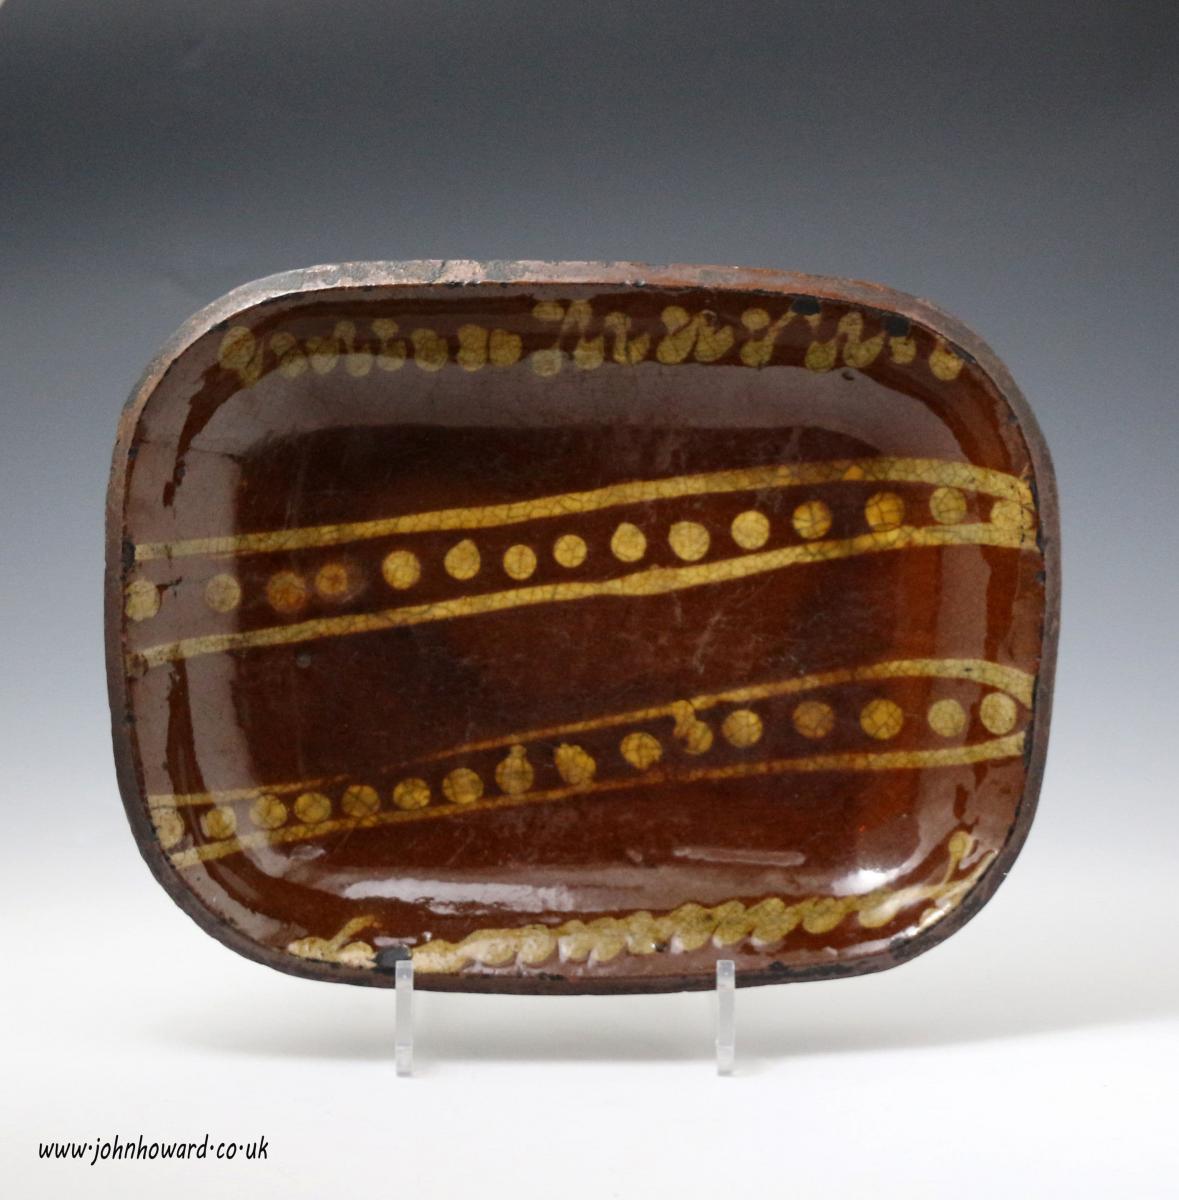 Antique period English slipware earthenware baking or loaf dish late 18thc.